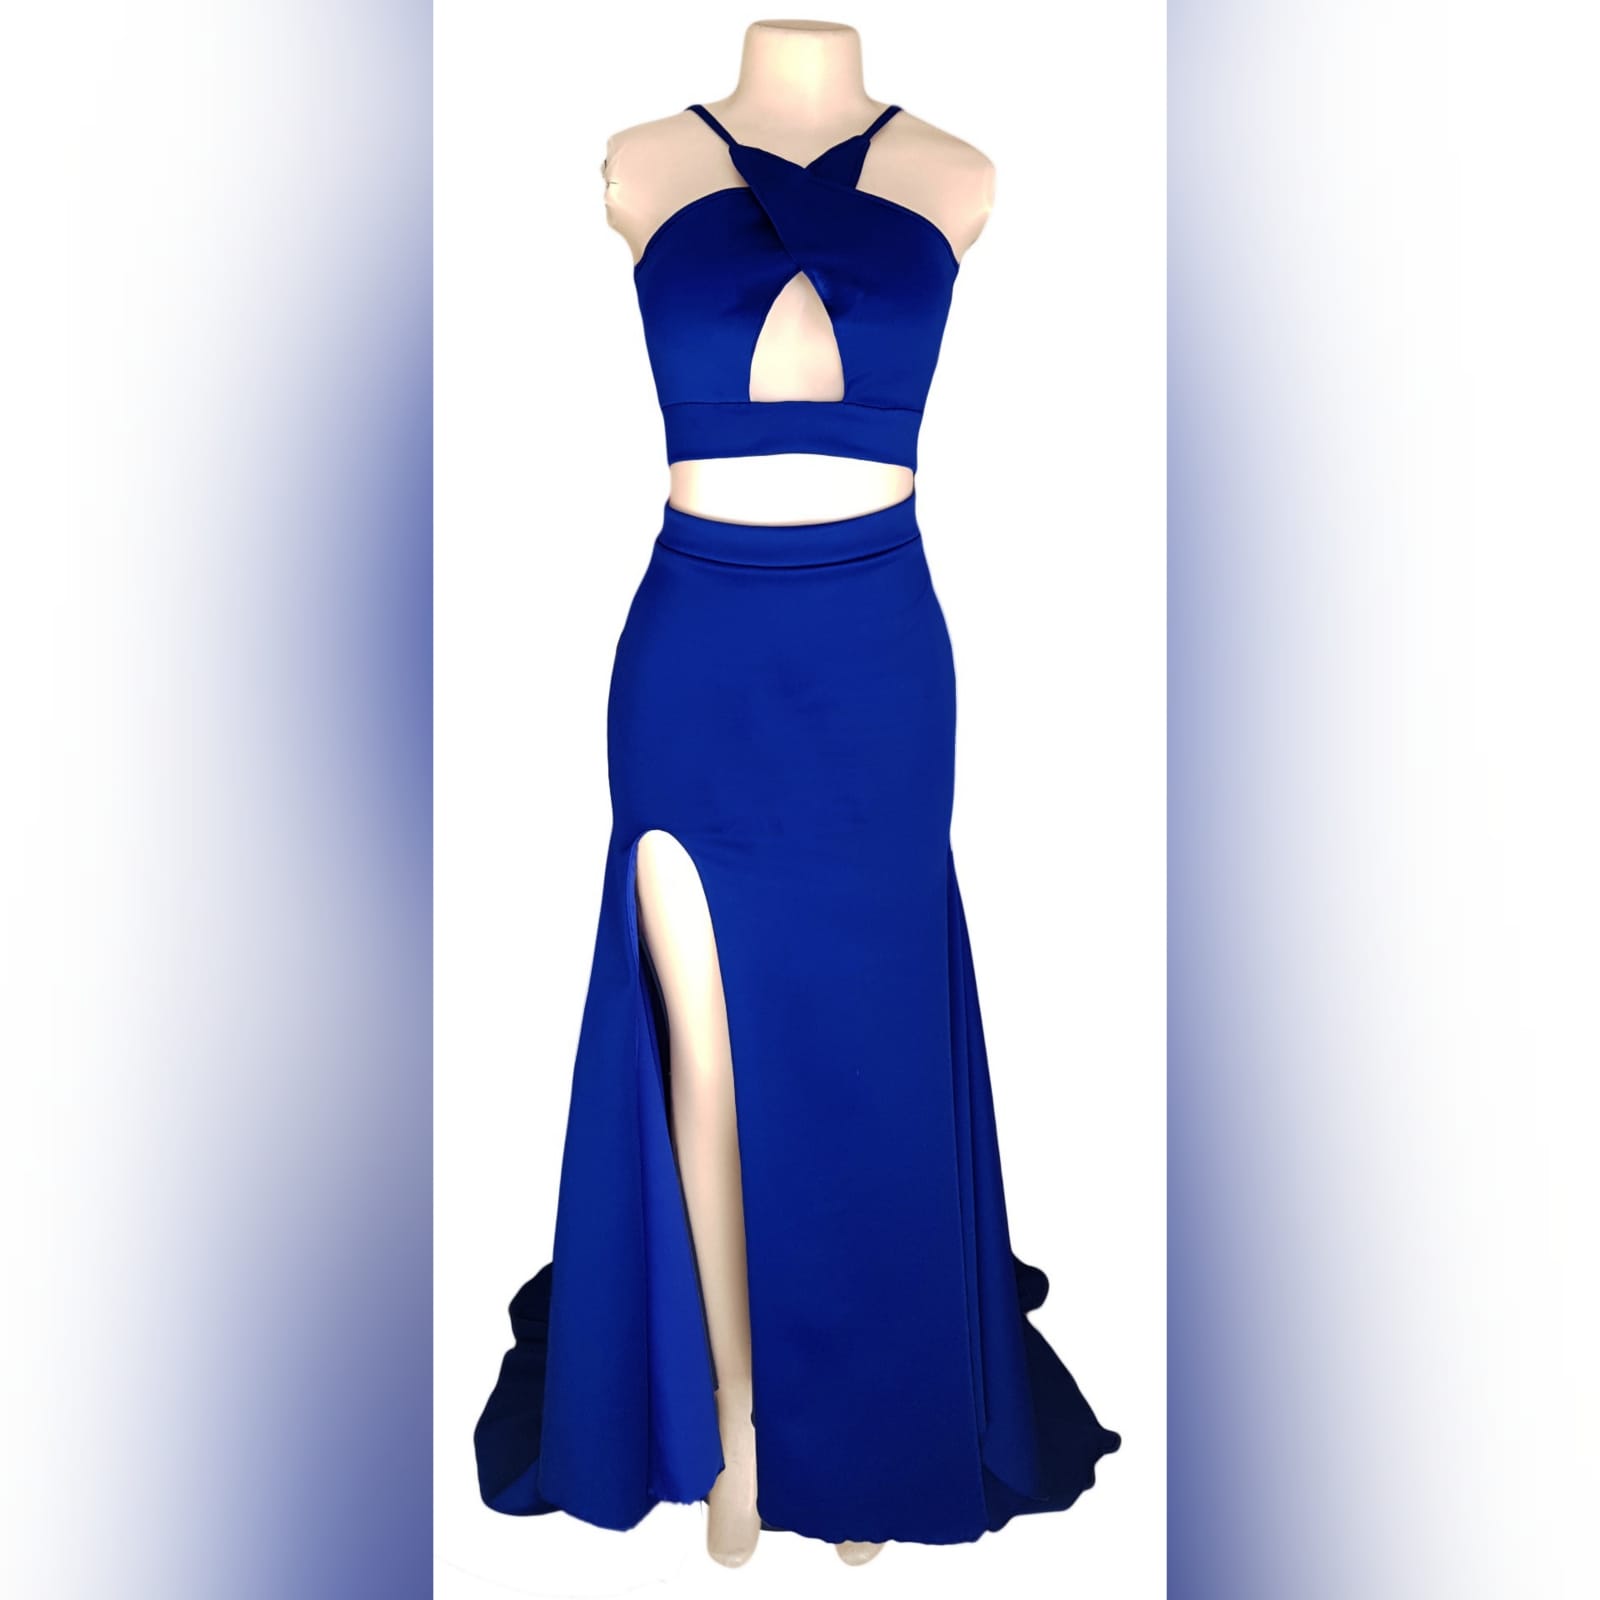 2 piece royal blue prom dress 1 2 piece royal blue prom dress. Crop top with cleavage opening. Fitted skirt with a slit and a train.